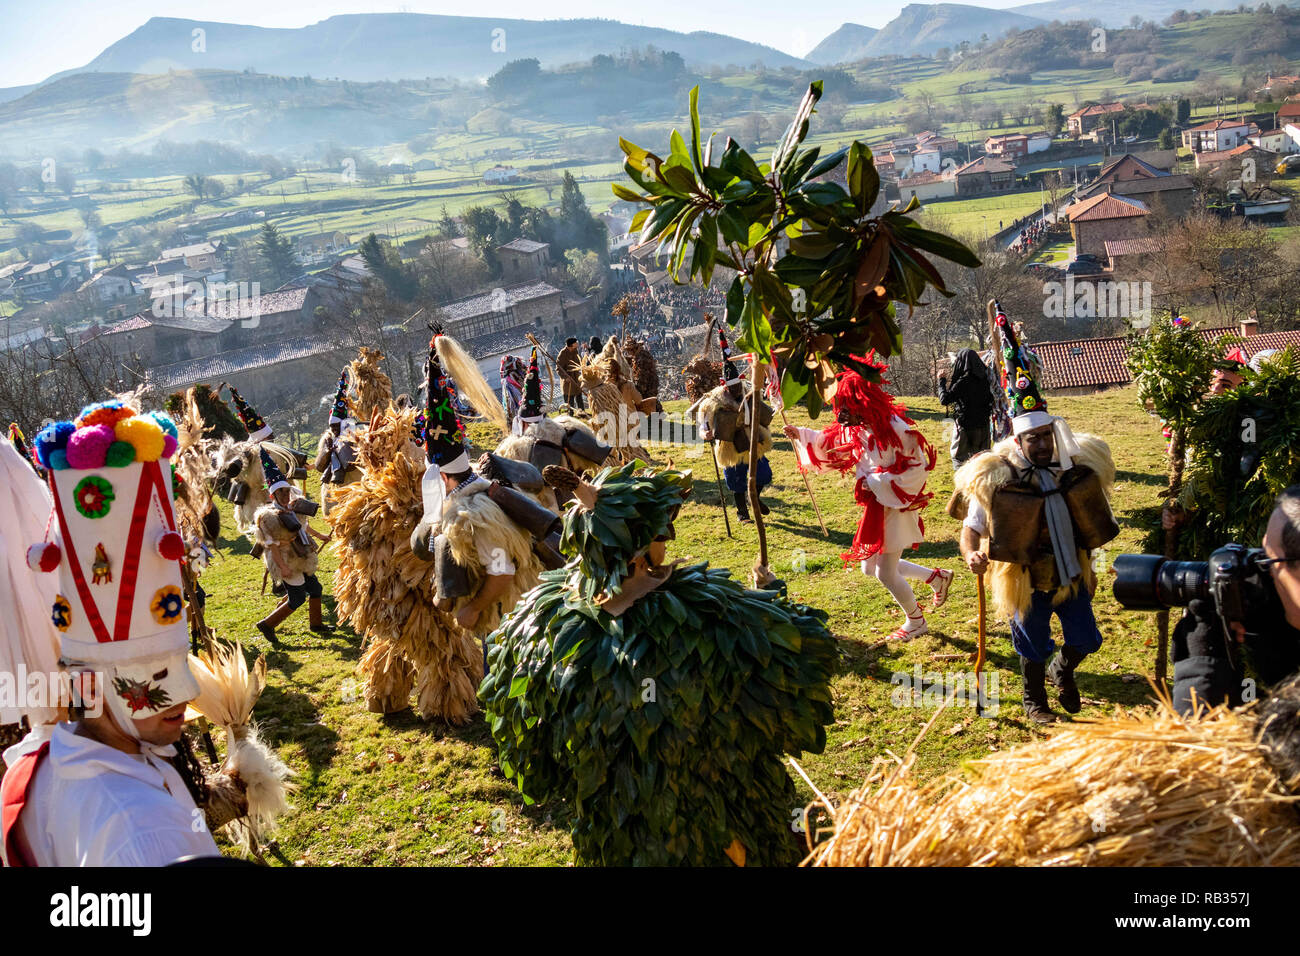 Cantabria, Spain. 06th Jan, 2019.  Most of the characters of the procession seen together during the celebration.La Vijanera is a fiesta of festive nature that takes place in the town of SiliÃ³ (Molledo), Cantabria (Spain) on the first Sunday of each year. Due to its popularity and tradition, it has been declared a Fiesta of National Tourist Interest. Credit: ZUMA Press, Inc./Alamy Live News Stock Photo